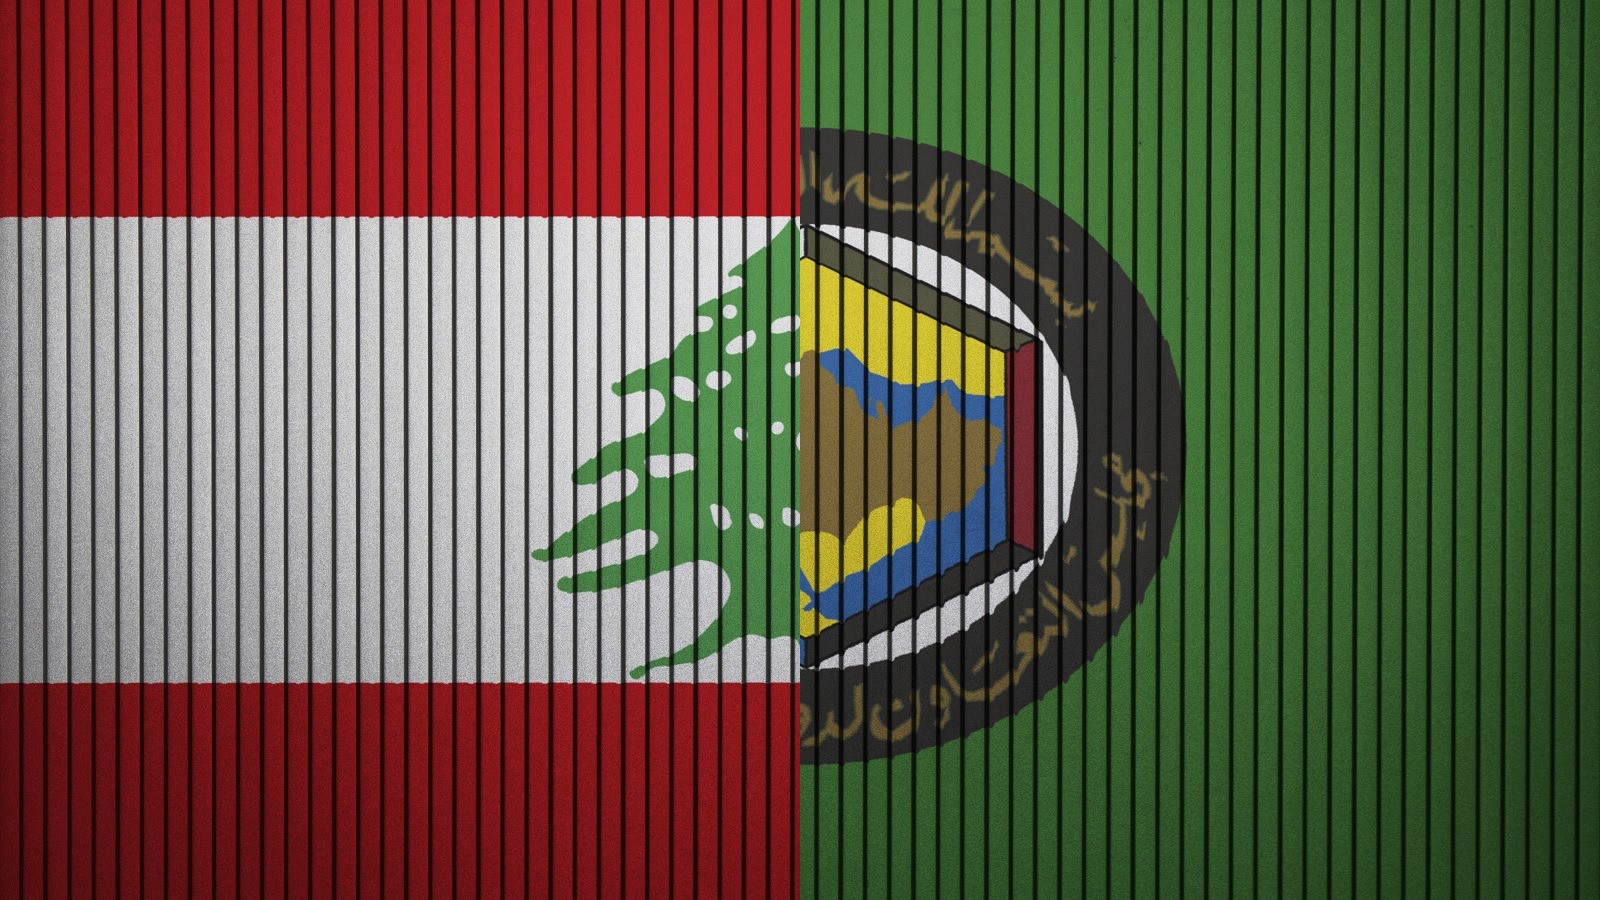 Lebanese-Gulf Relations: Where to From Here?